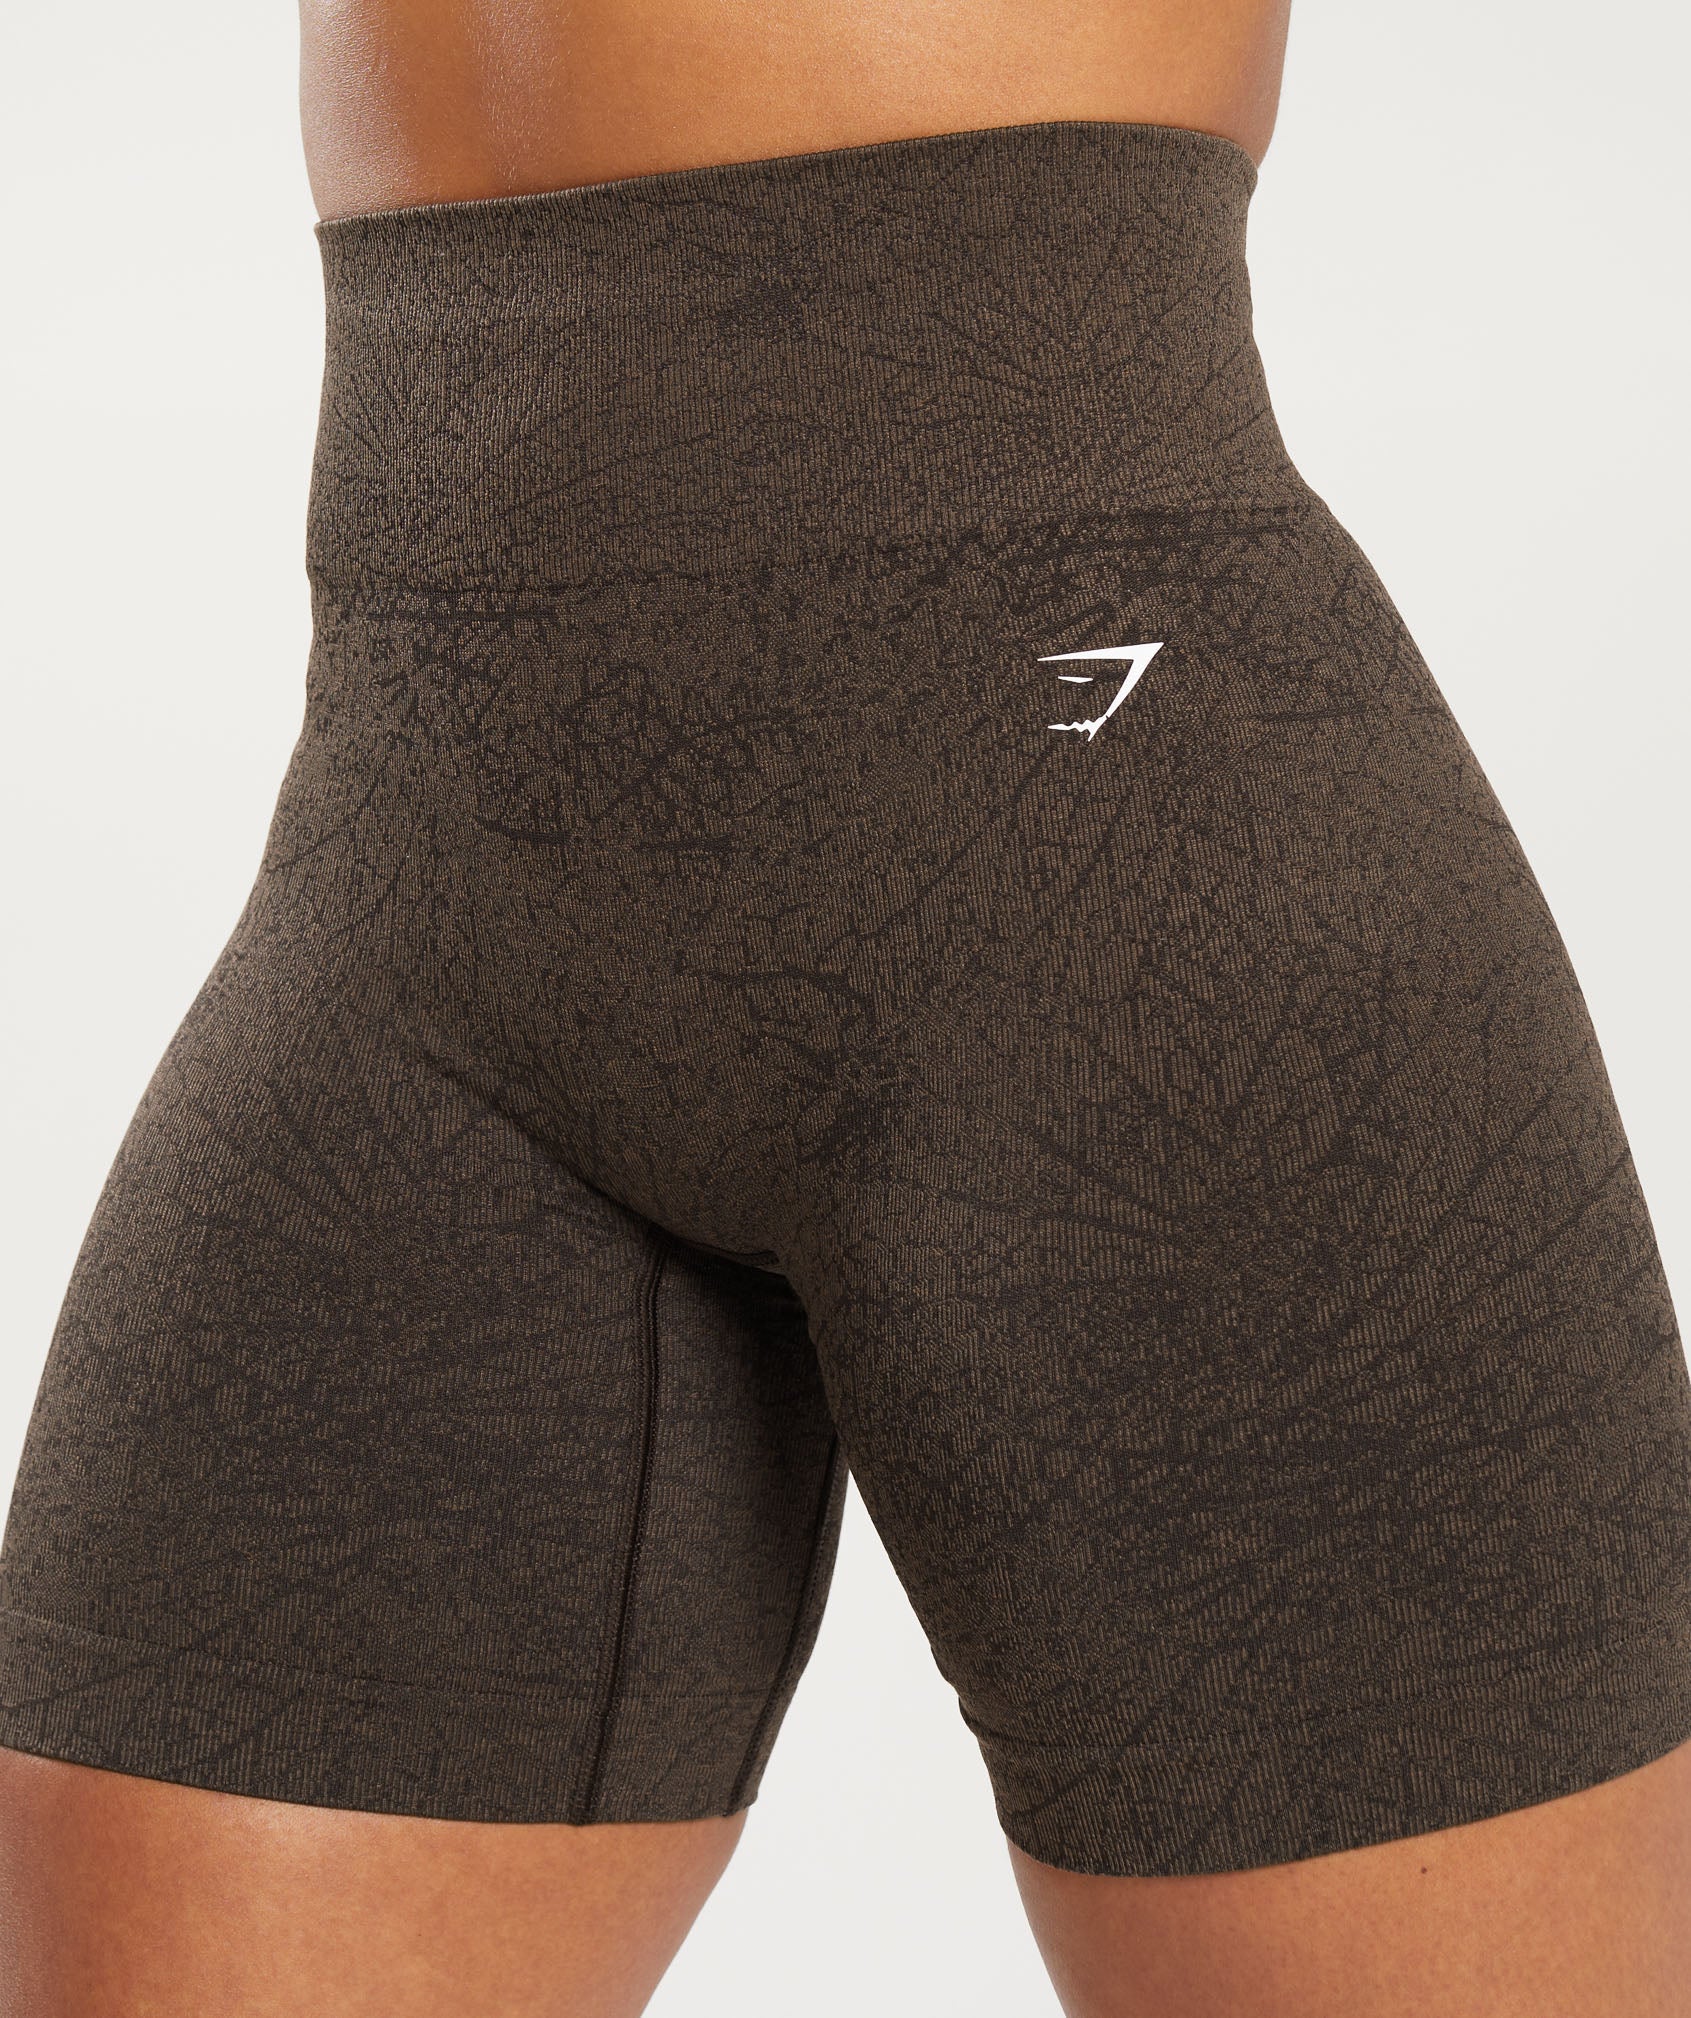 Adapt Pattern Seamless Shorts in Woodland Brown/Soul Brown - view 5